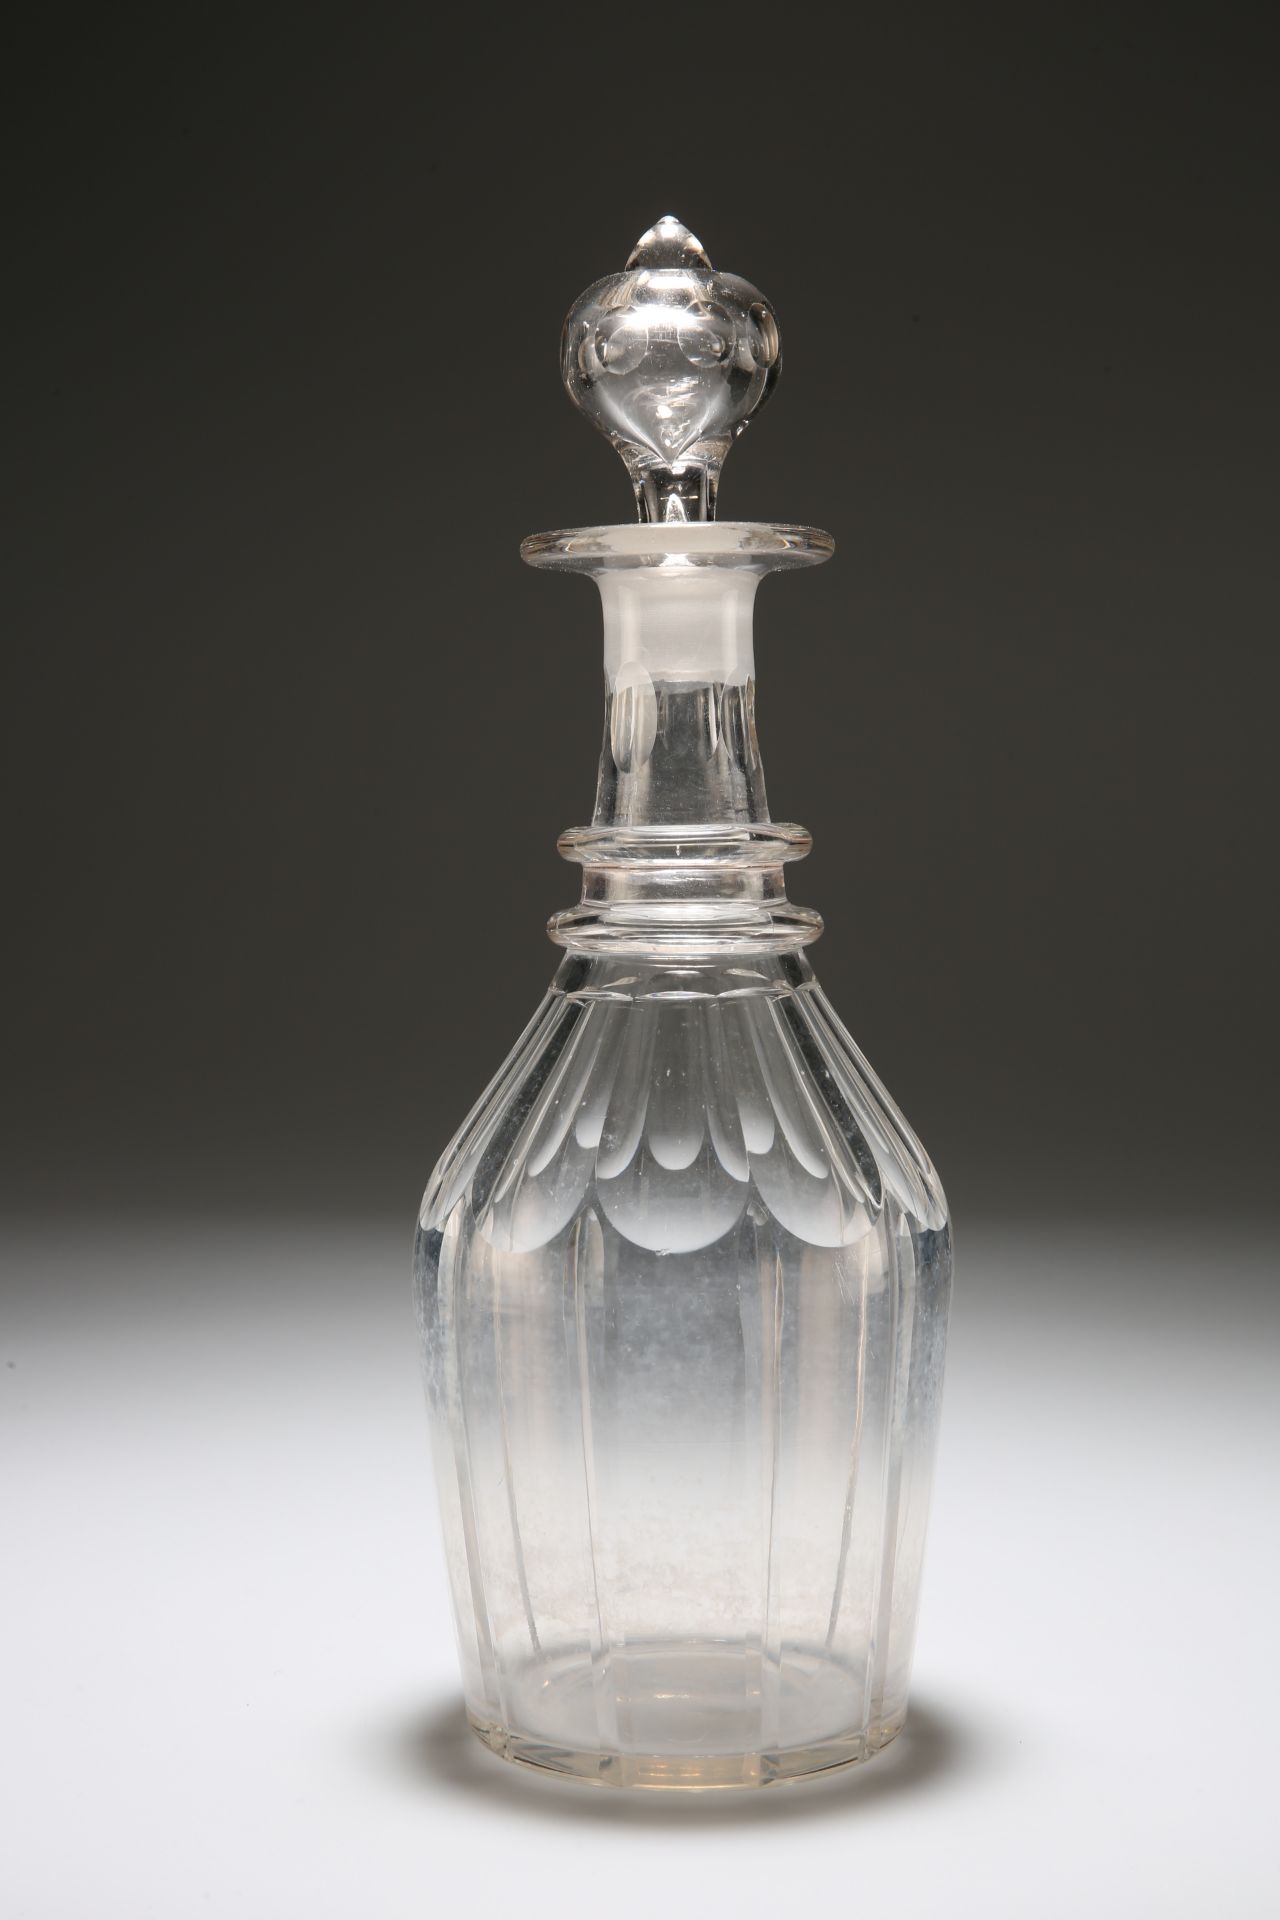 A CUT-GLASS DECANTER WITH DOUBLE RING NECK, MID 19th CENTURY